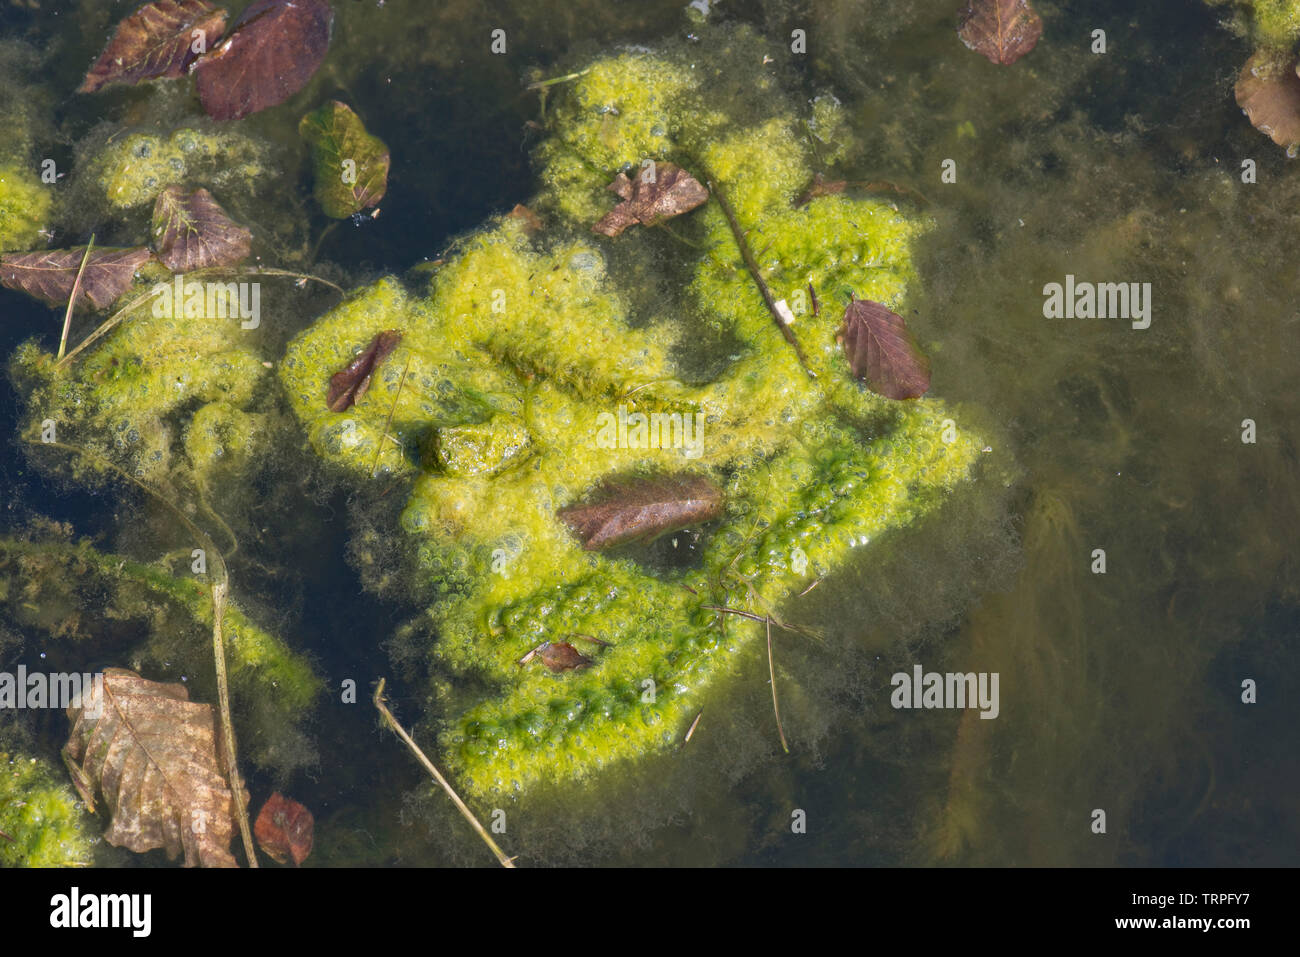 Filamentous algae or blanket weed contaminating a garden  pond, dense growth around aquatic plants in early spring Stock Photo